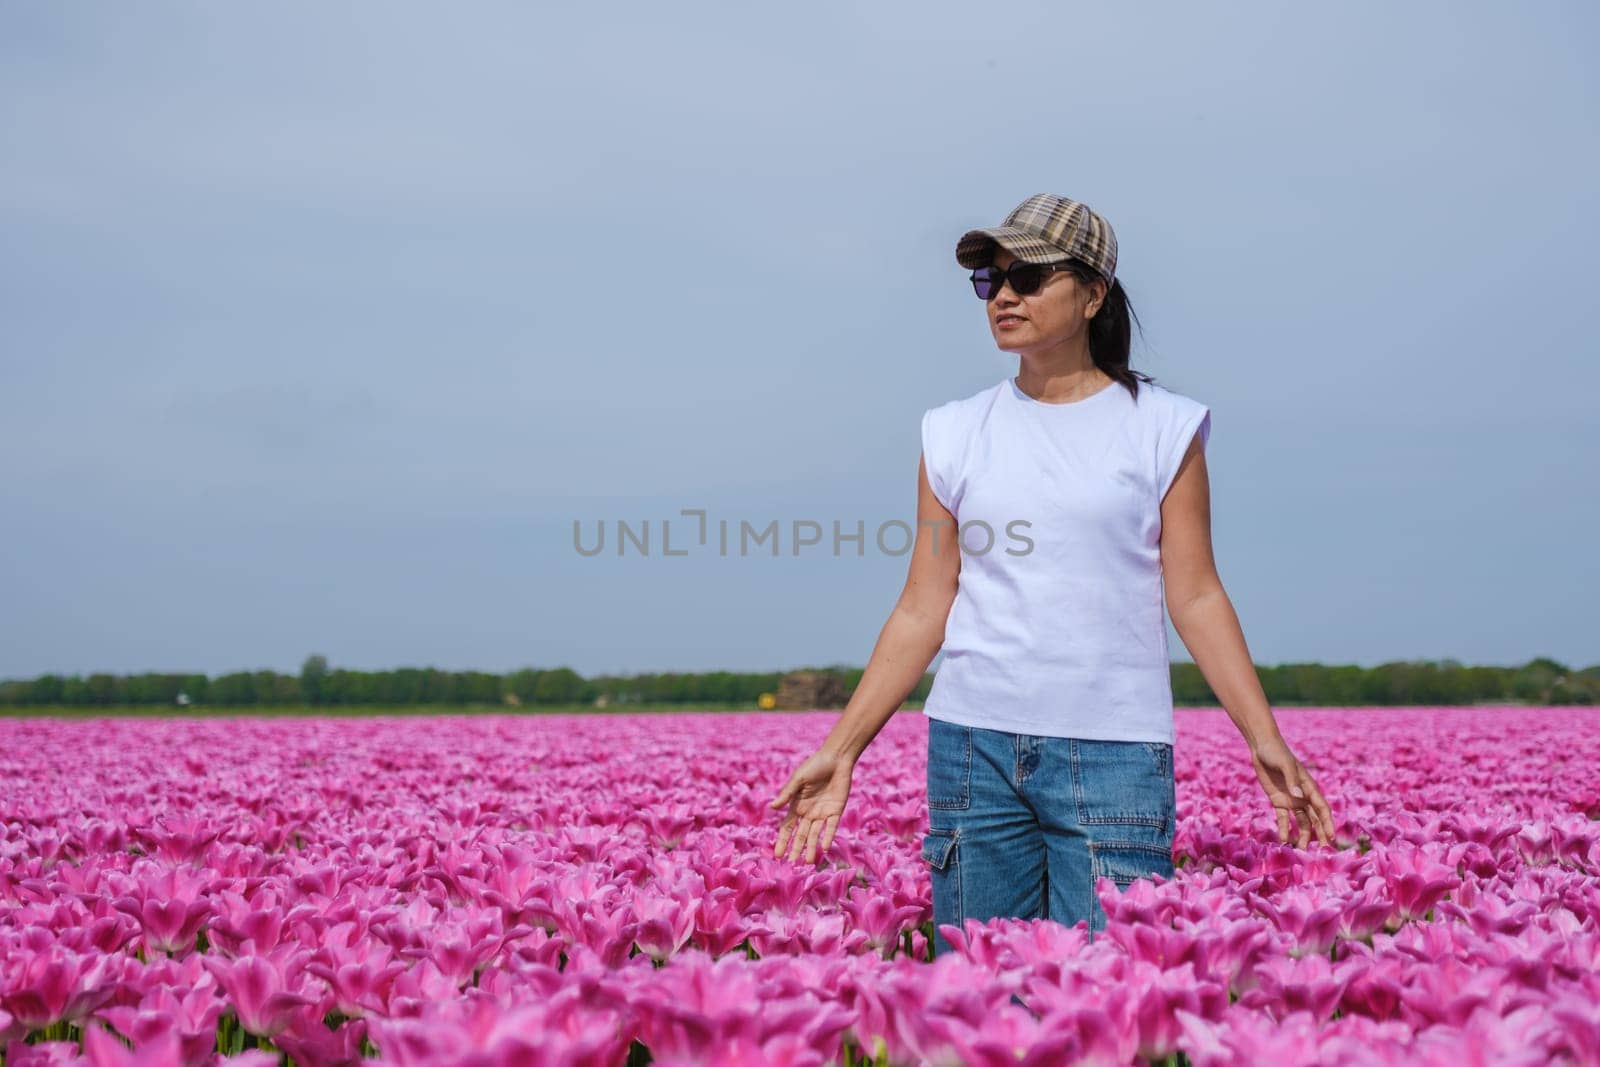 A graceful woman standing amidst a vibrant field of pink tulips in Texel, Netherlands, as the colorful flowers sway with the gentle breeze by fokkebok